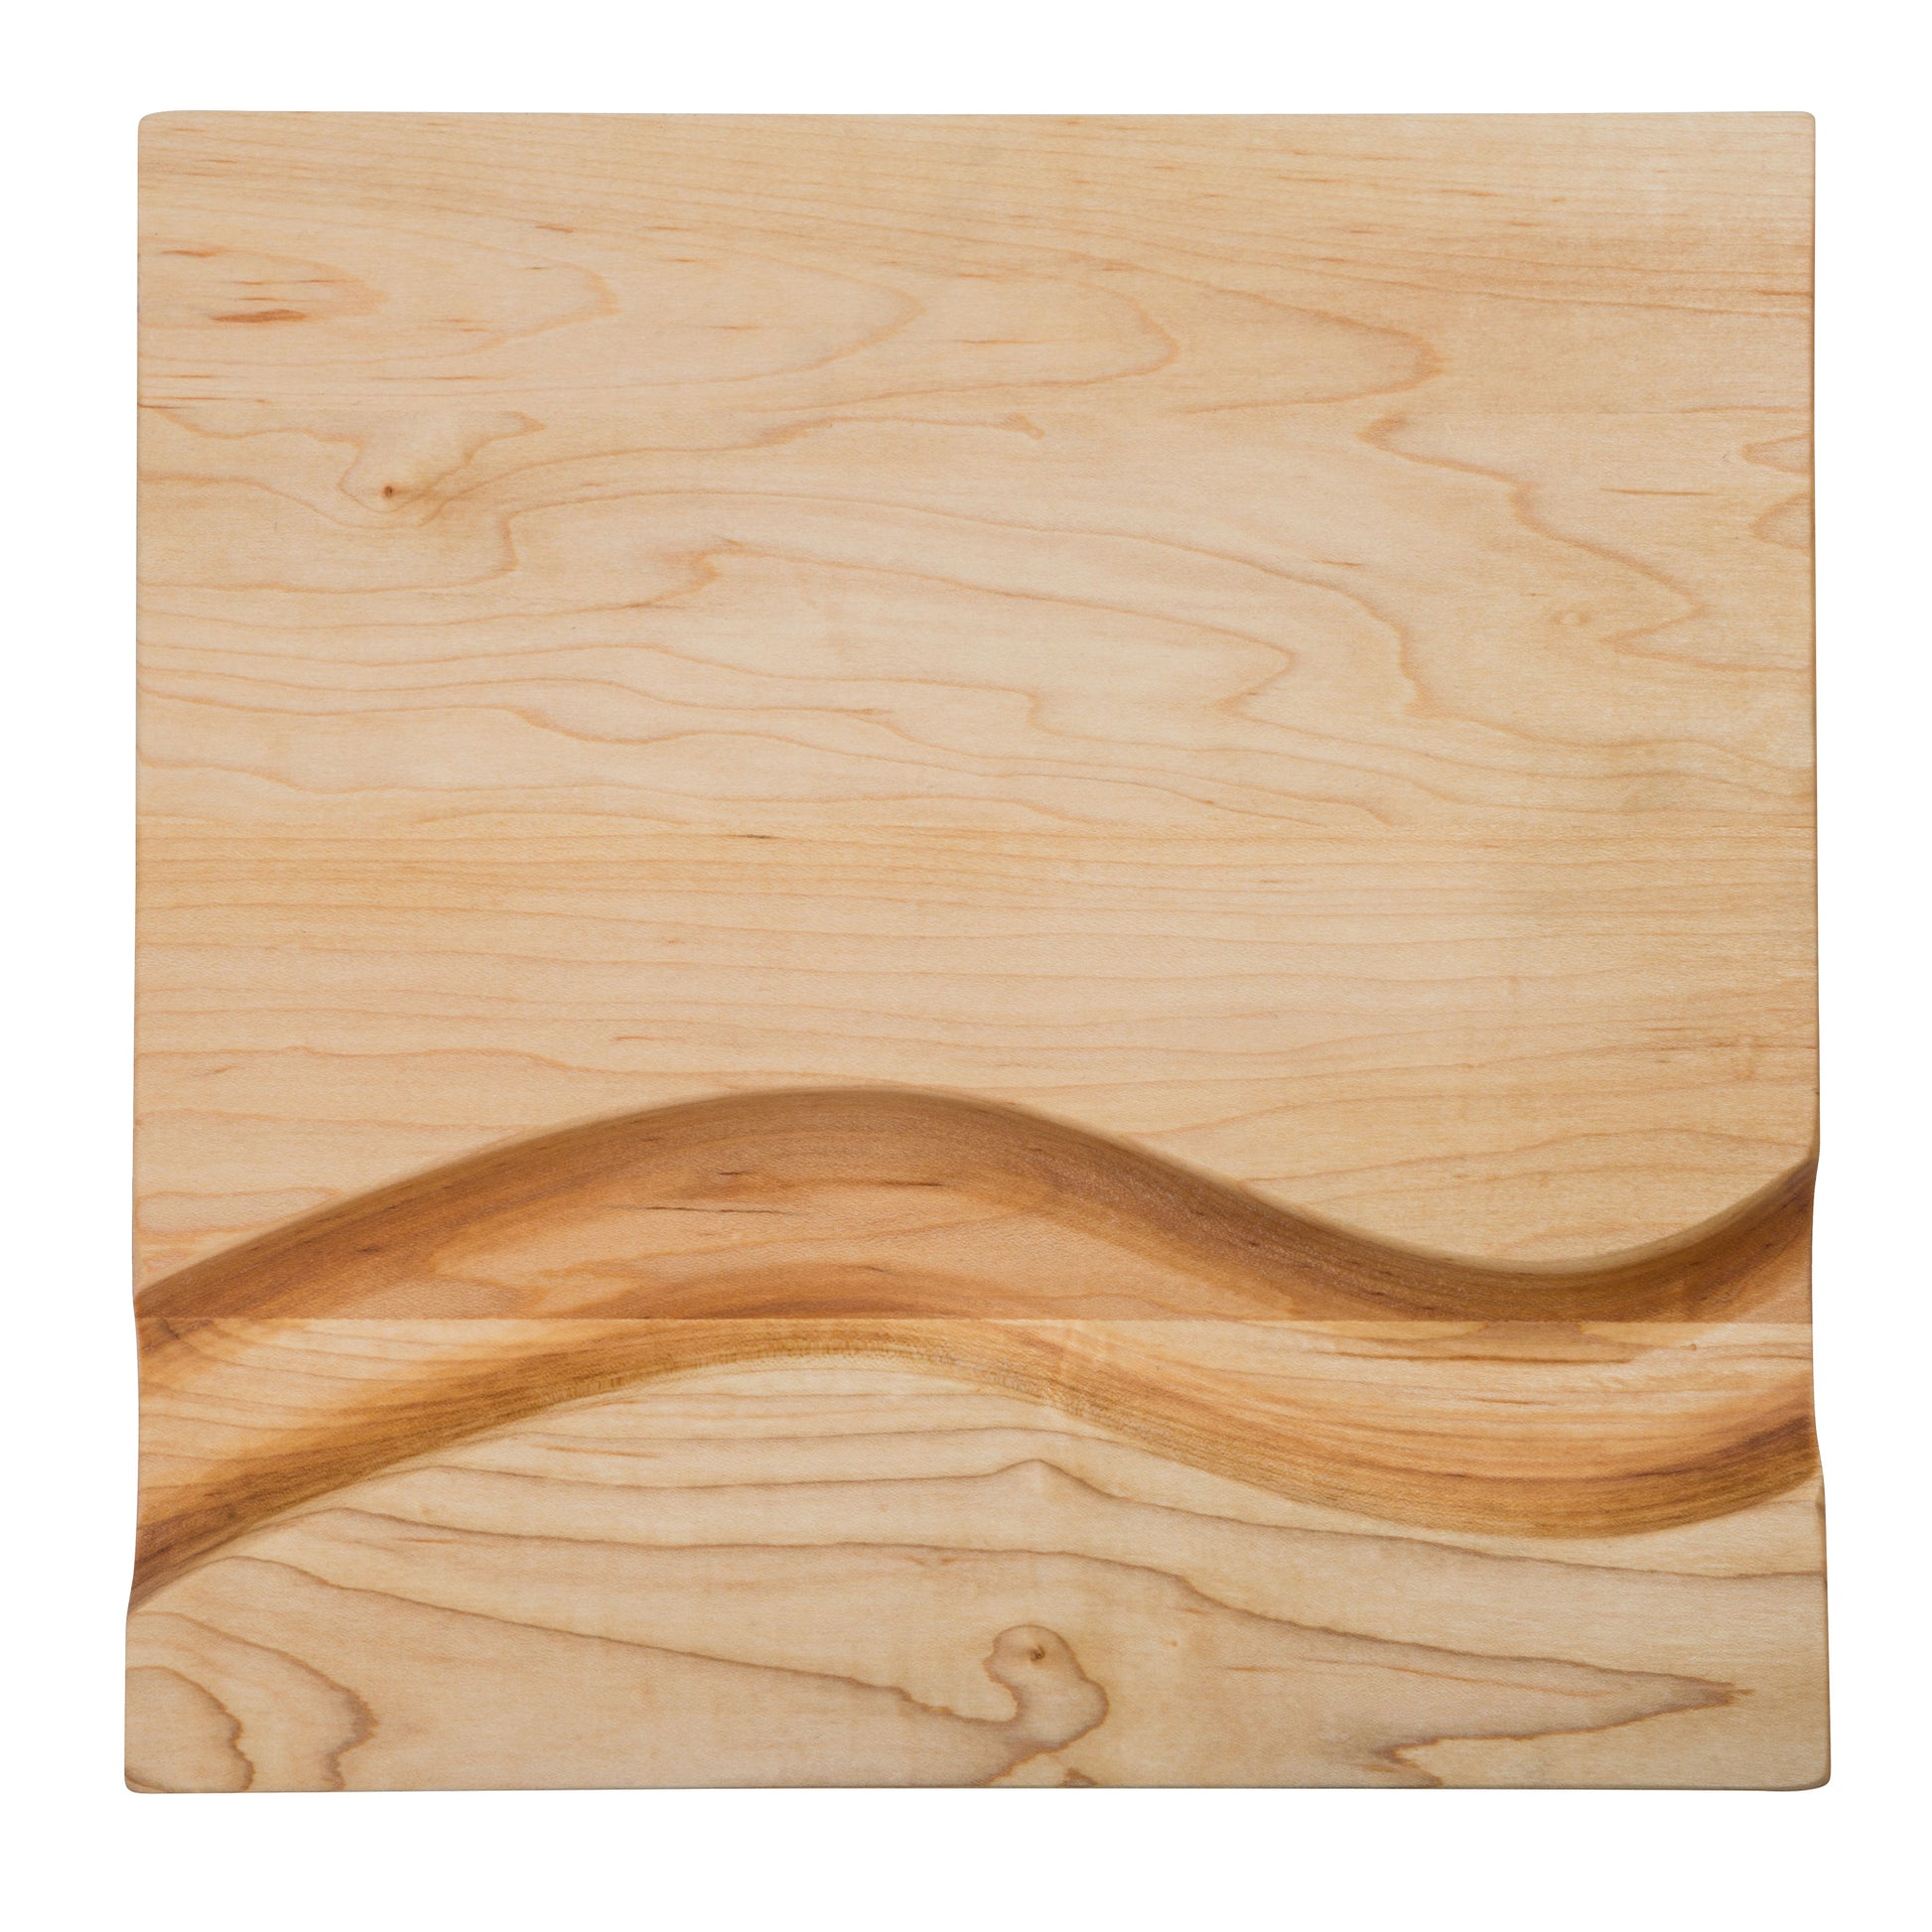 Maple Square Cheese Board With Cracker Groove-12 1/4" x 12 1/4"